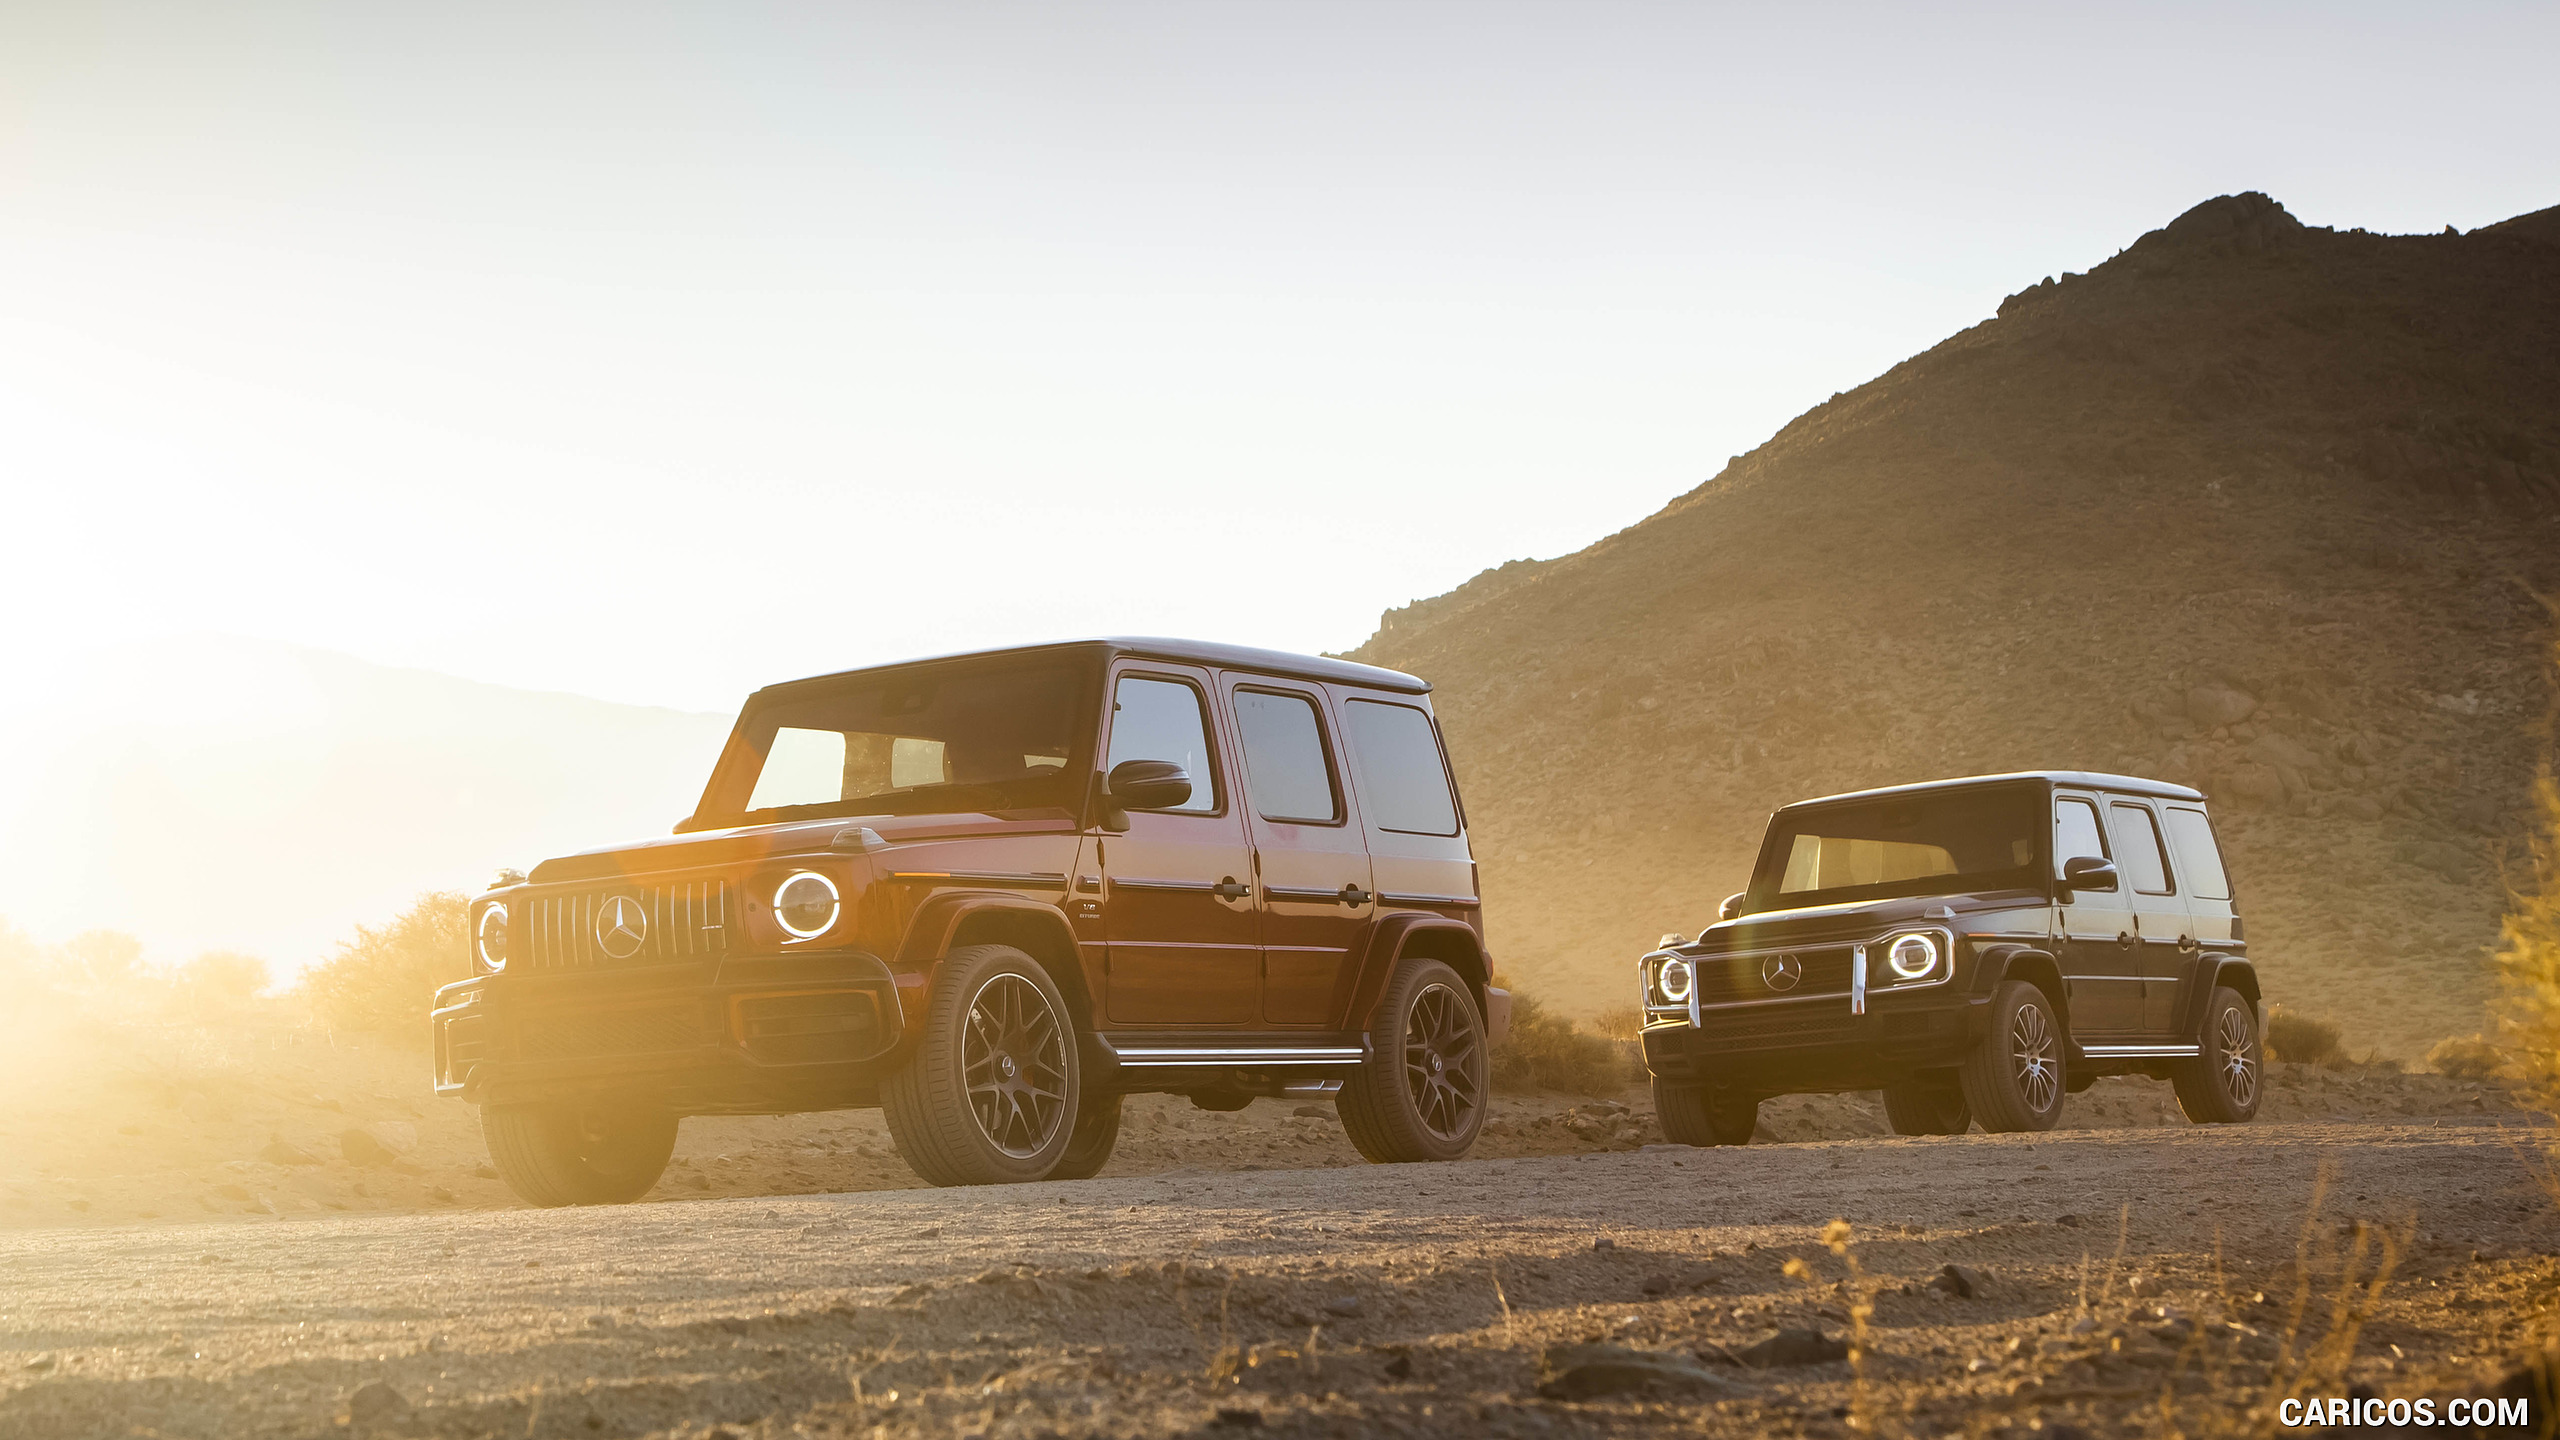 2019 Mercedes-AMG G63 (U.S.-Spec) and 2019 G550, #367 of 452